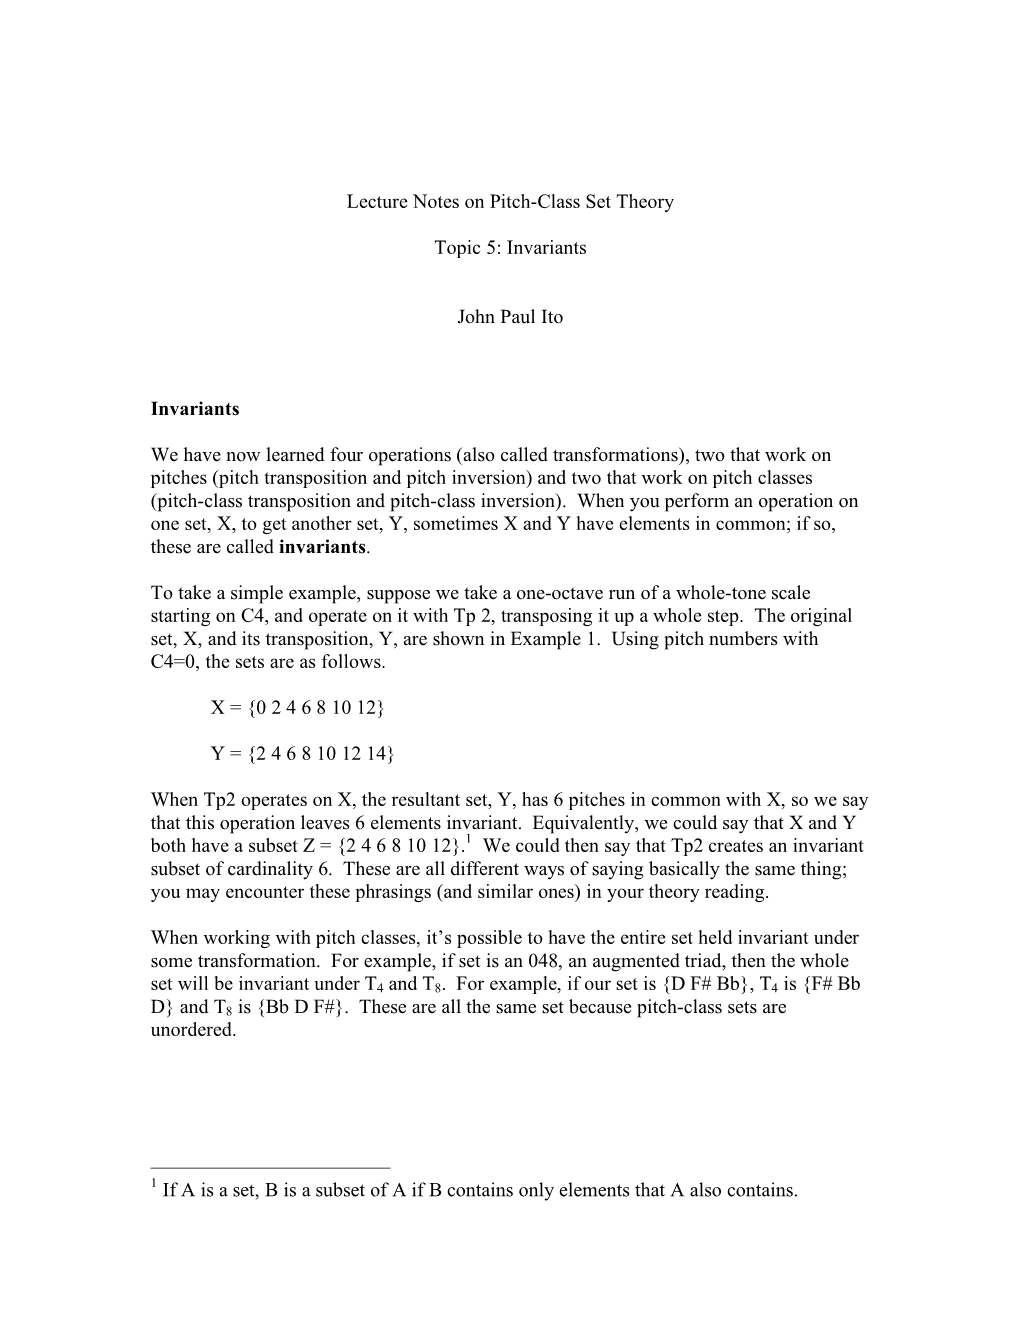 Pitch-Class Set Theory 5: Invariants